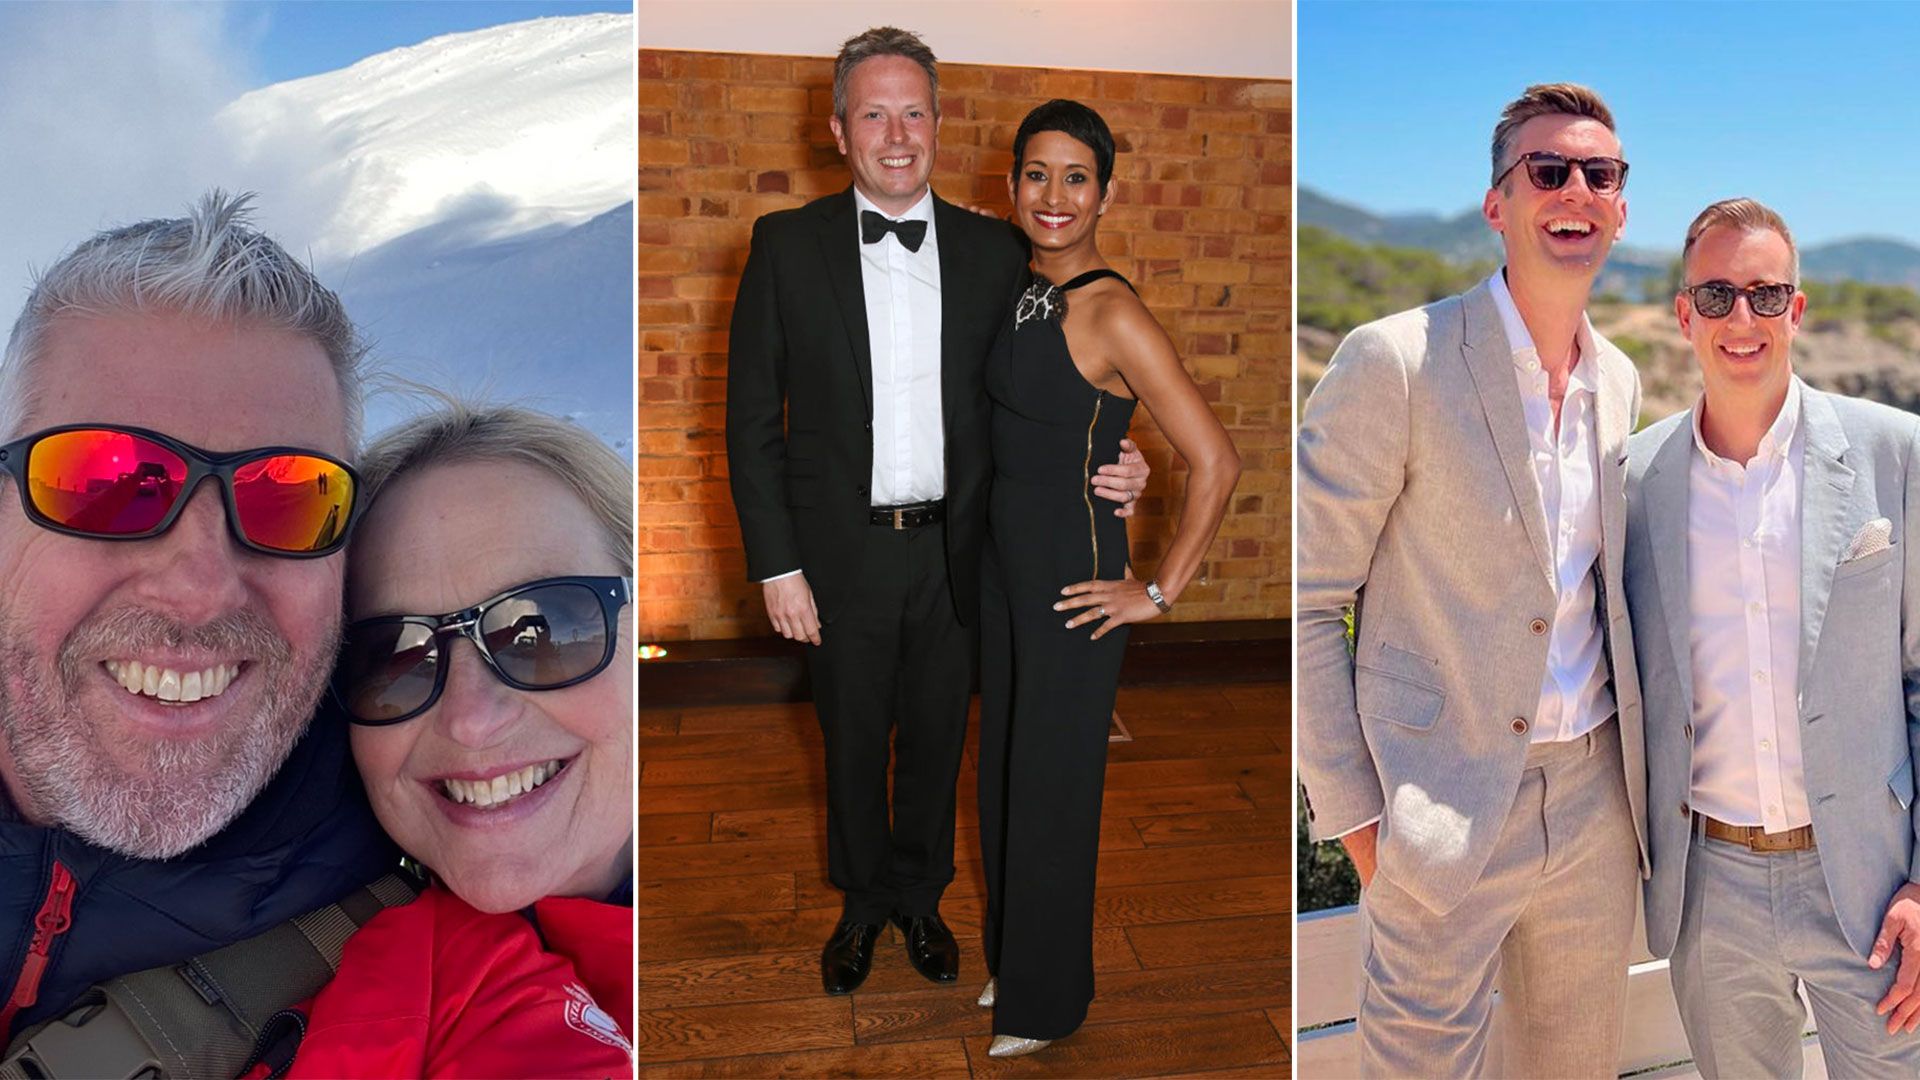 Carol Kirkwood with her fiancee, Naga Munchetty with her husband and Ben Thompson with his boyfriend 